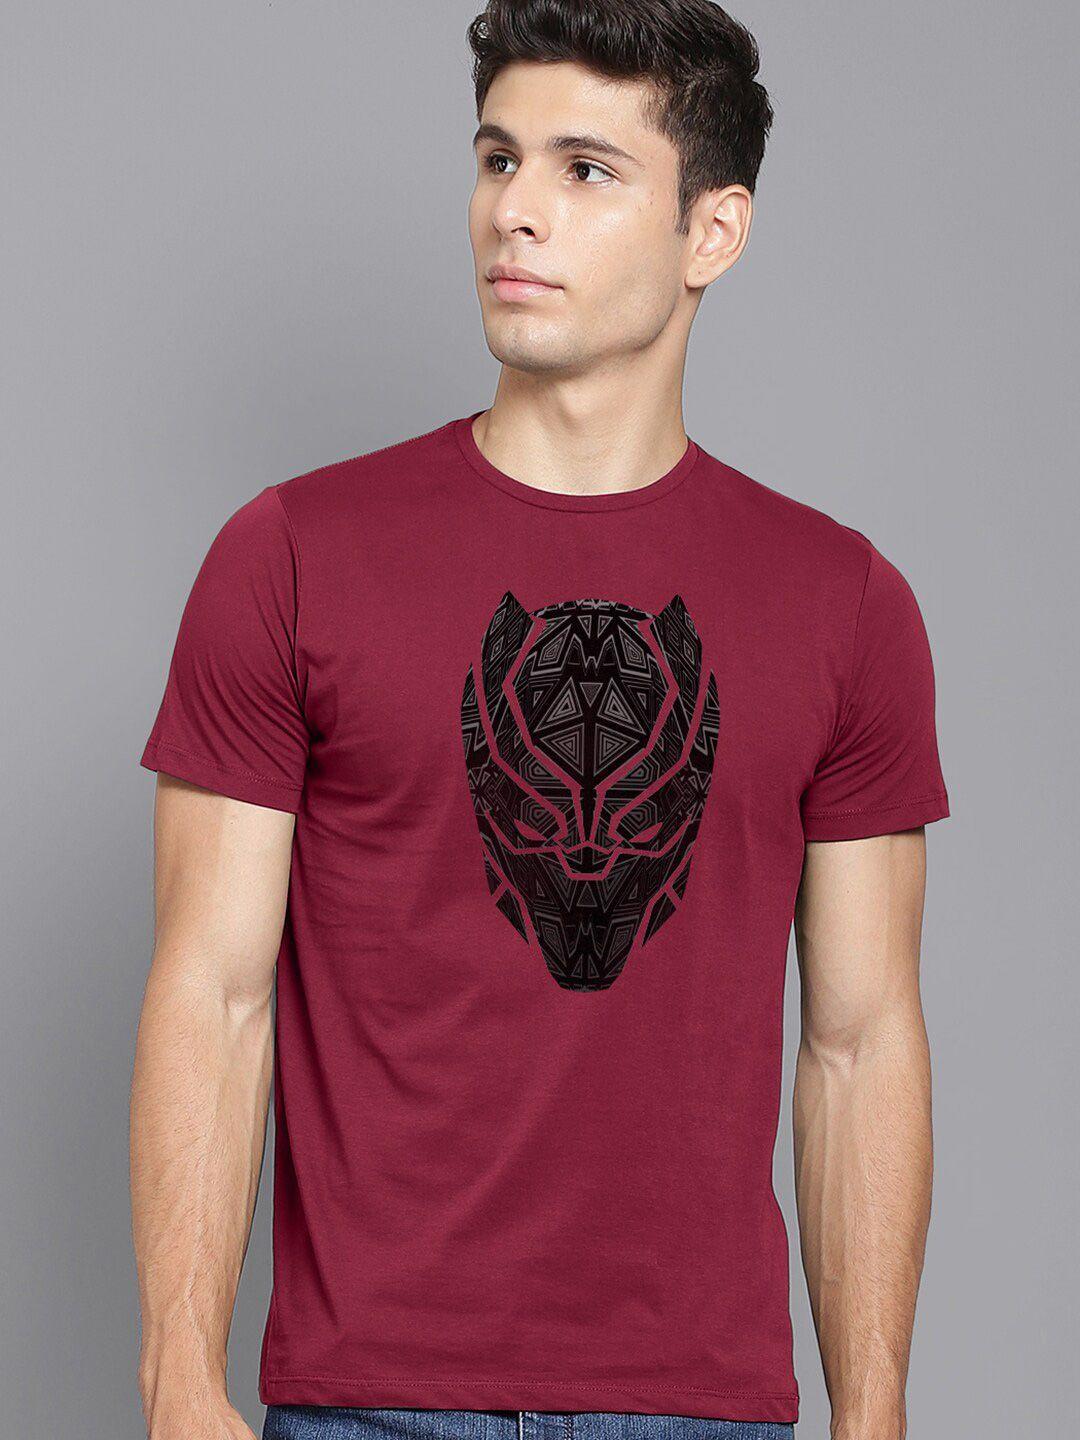 free-authority-men-black-panther-printed-pure-cotton-t-shirt